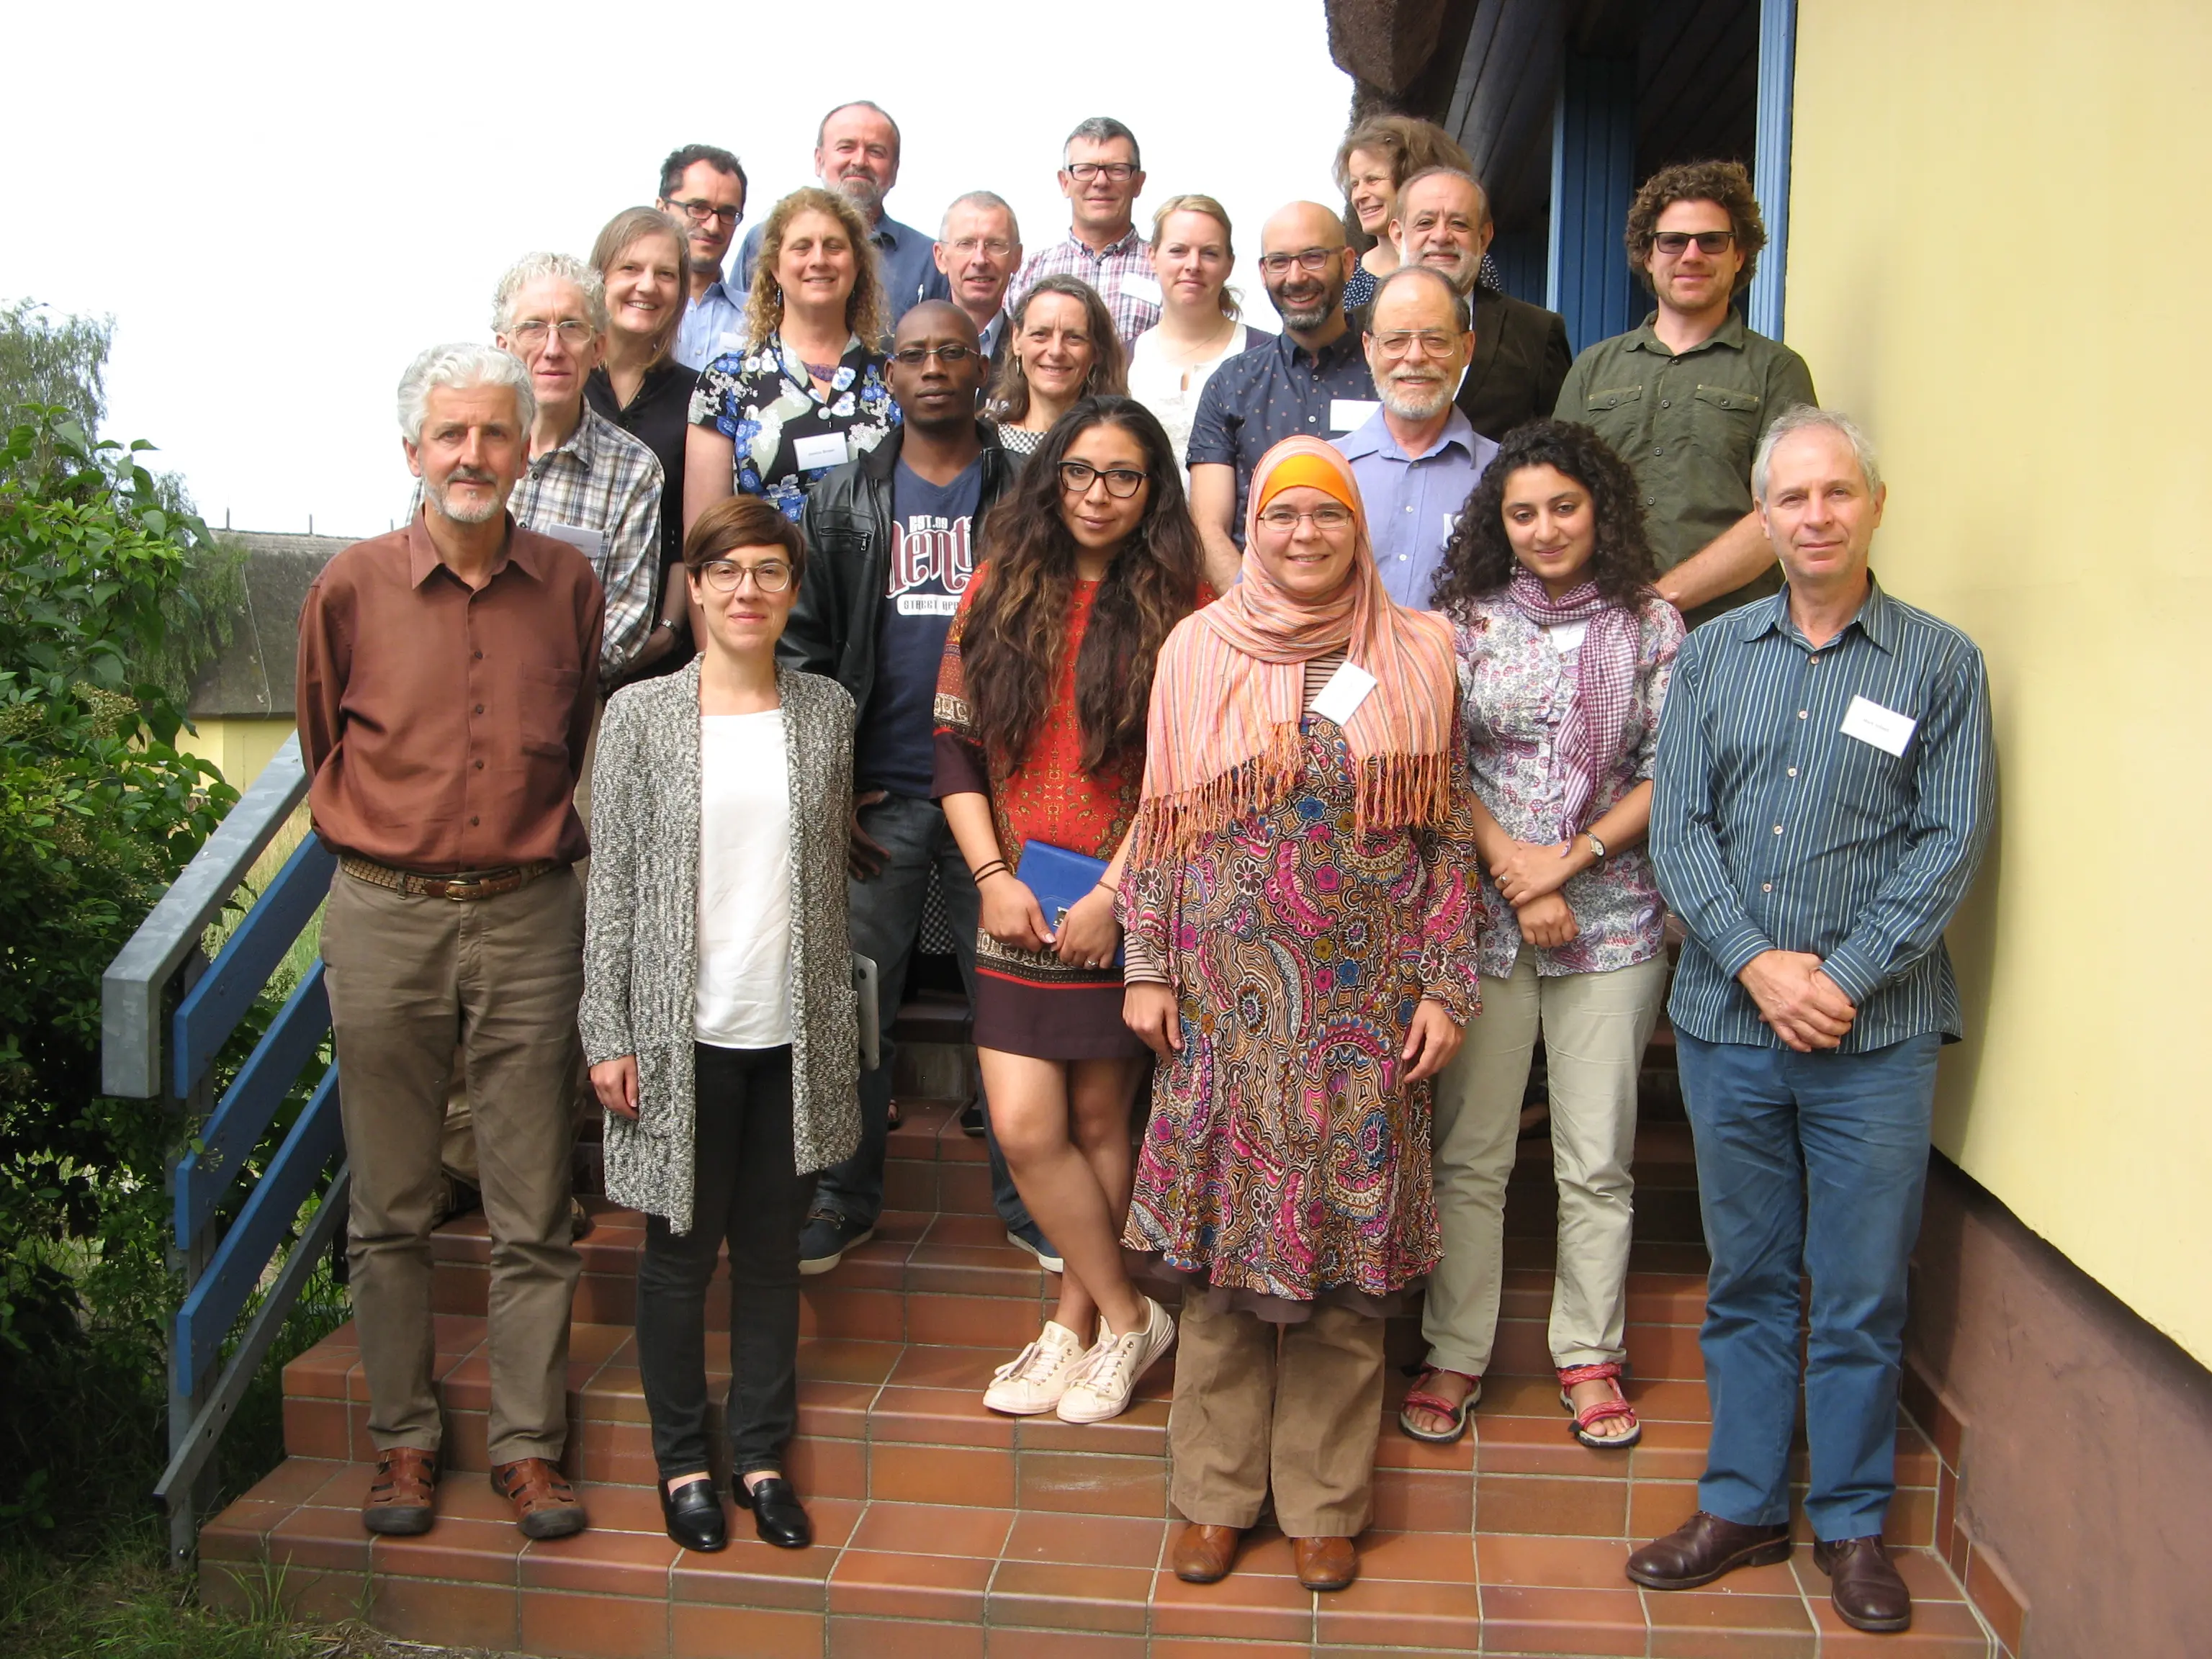 The participants of the CSVPA-BfN workshop on Cultural and Spiritual Significance of Nature in the Governance and Management of Protected and Conserved Areas at the International Nature Conservation Academy on Vilm Island, Germany.